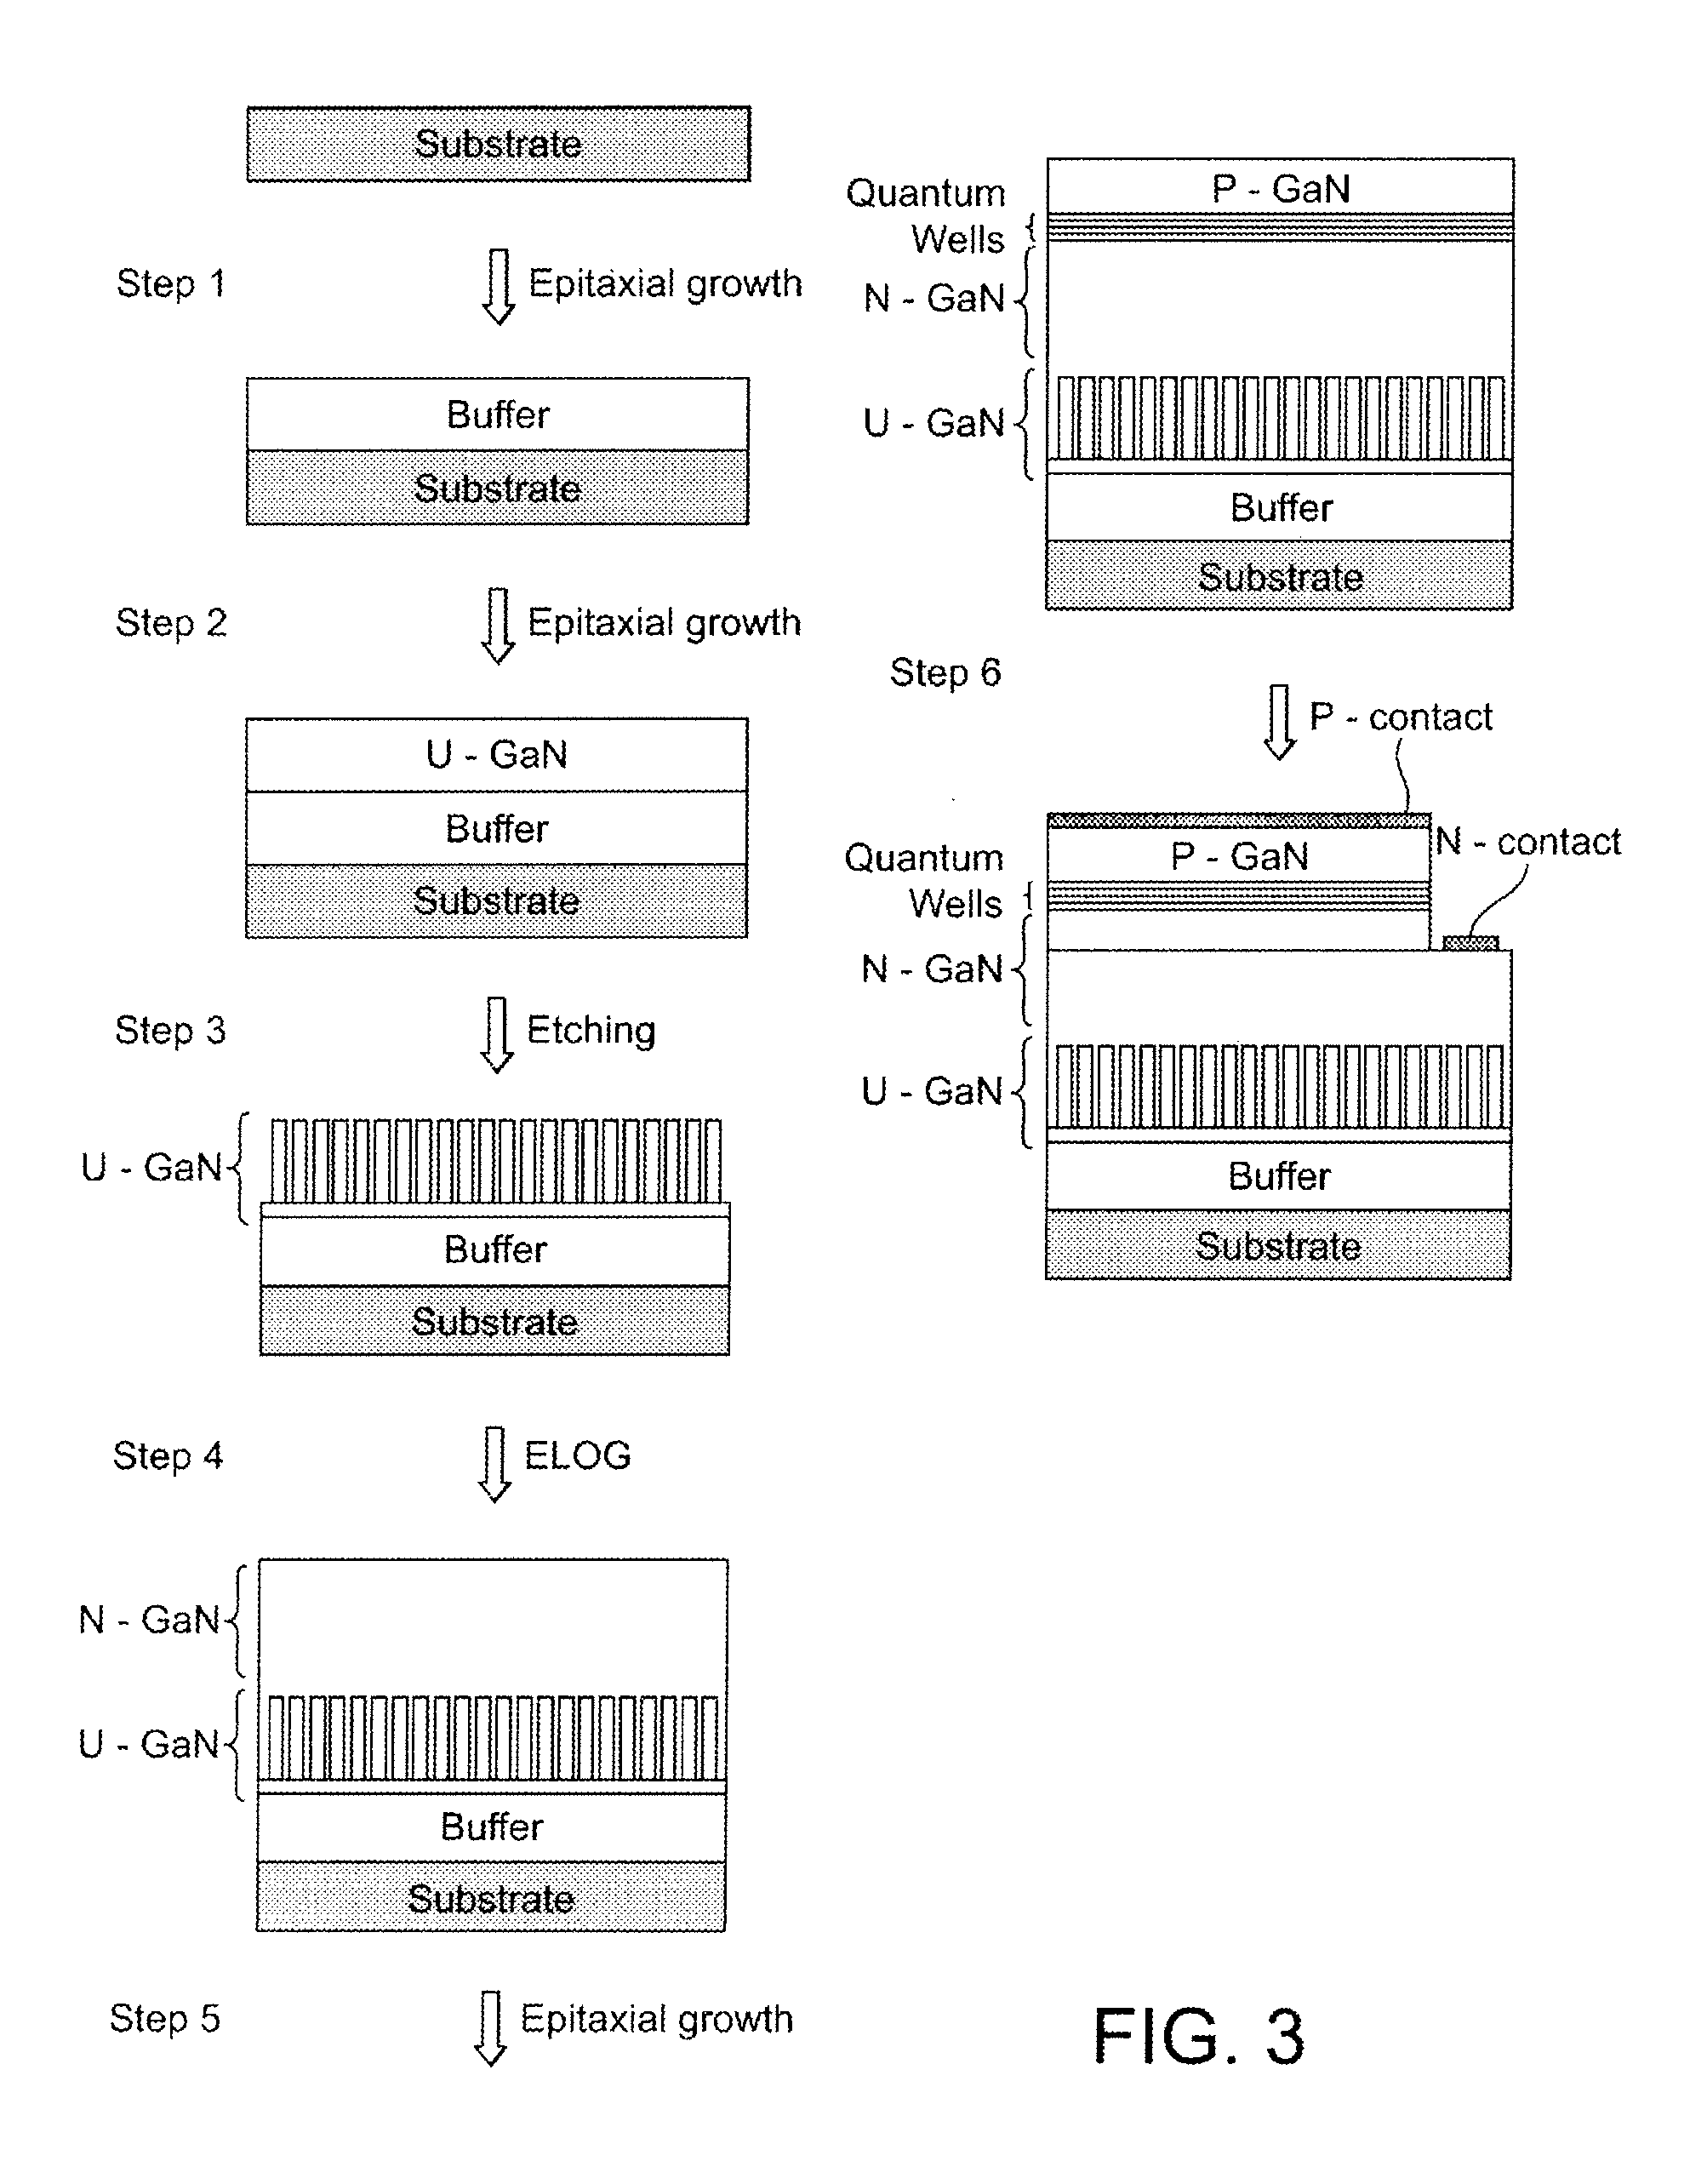 Production of semiconductor devices